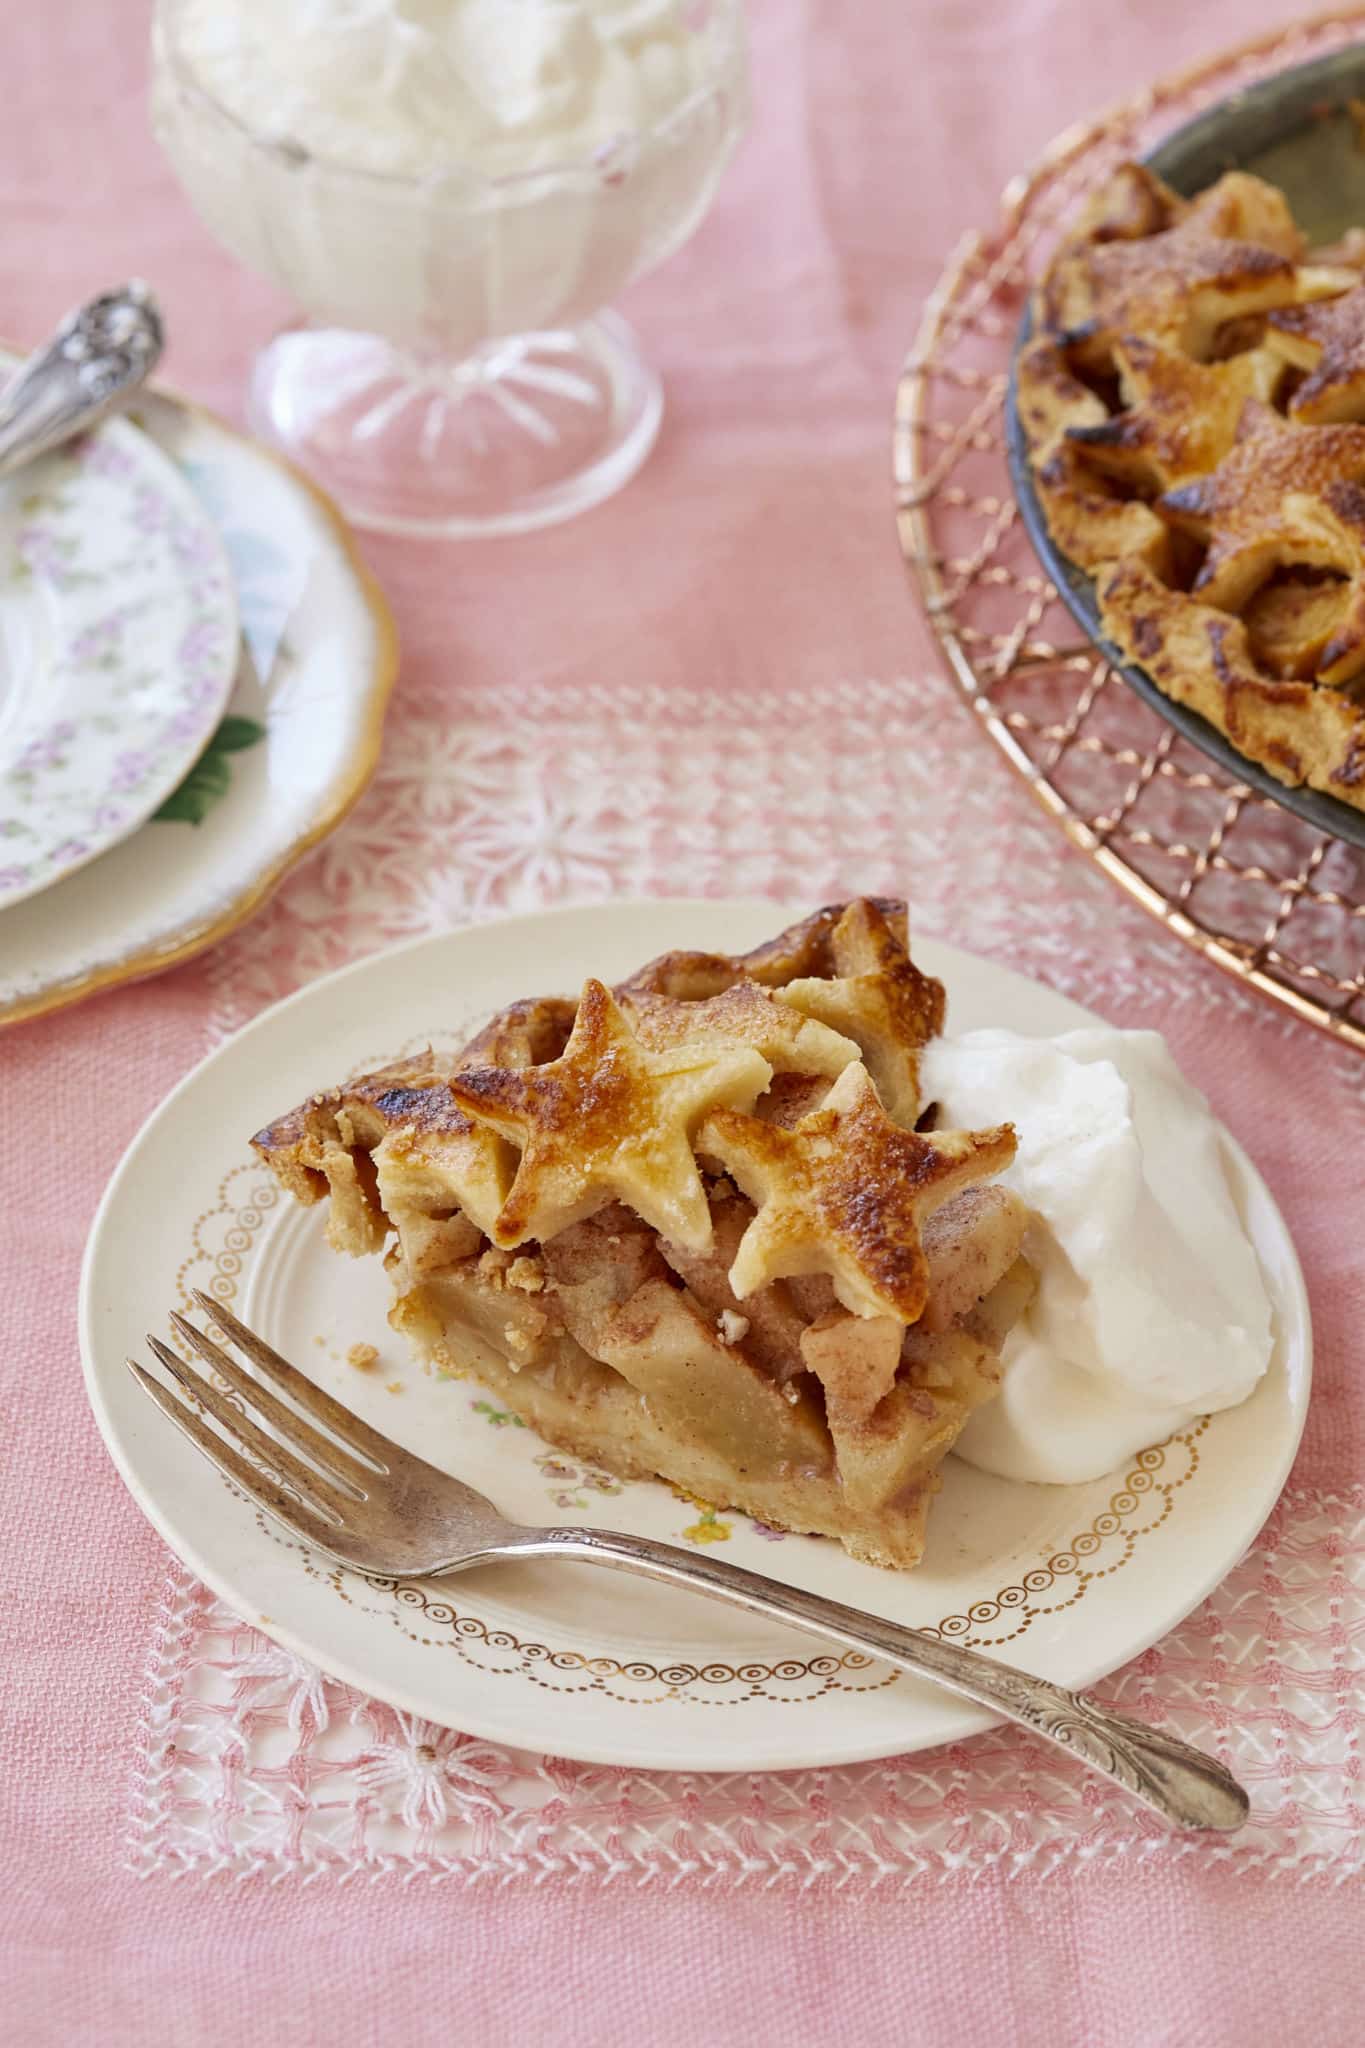 A slice of butterscotch pear pie. The pie's filling is baked pear with spices. It is served with homemade whipped cream.